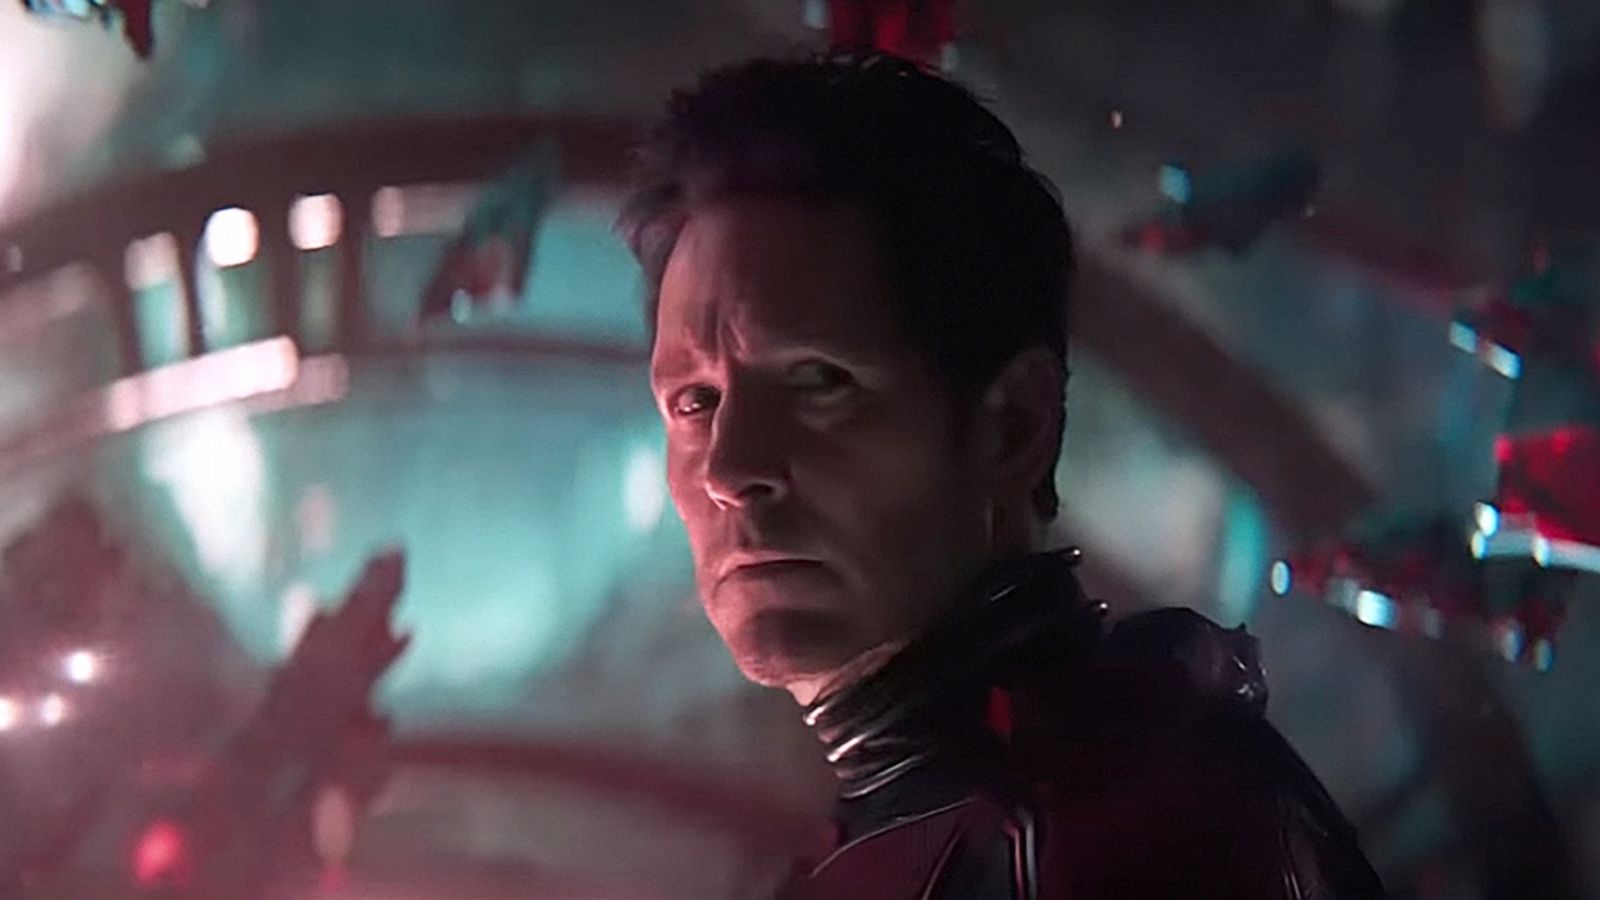 Marvel Studios' Ant-Man and The Wasp - Official 'Introducing